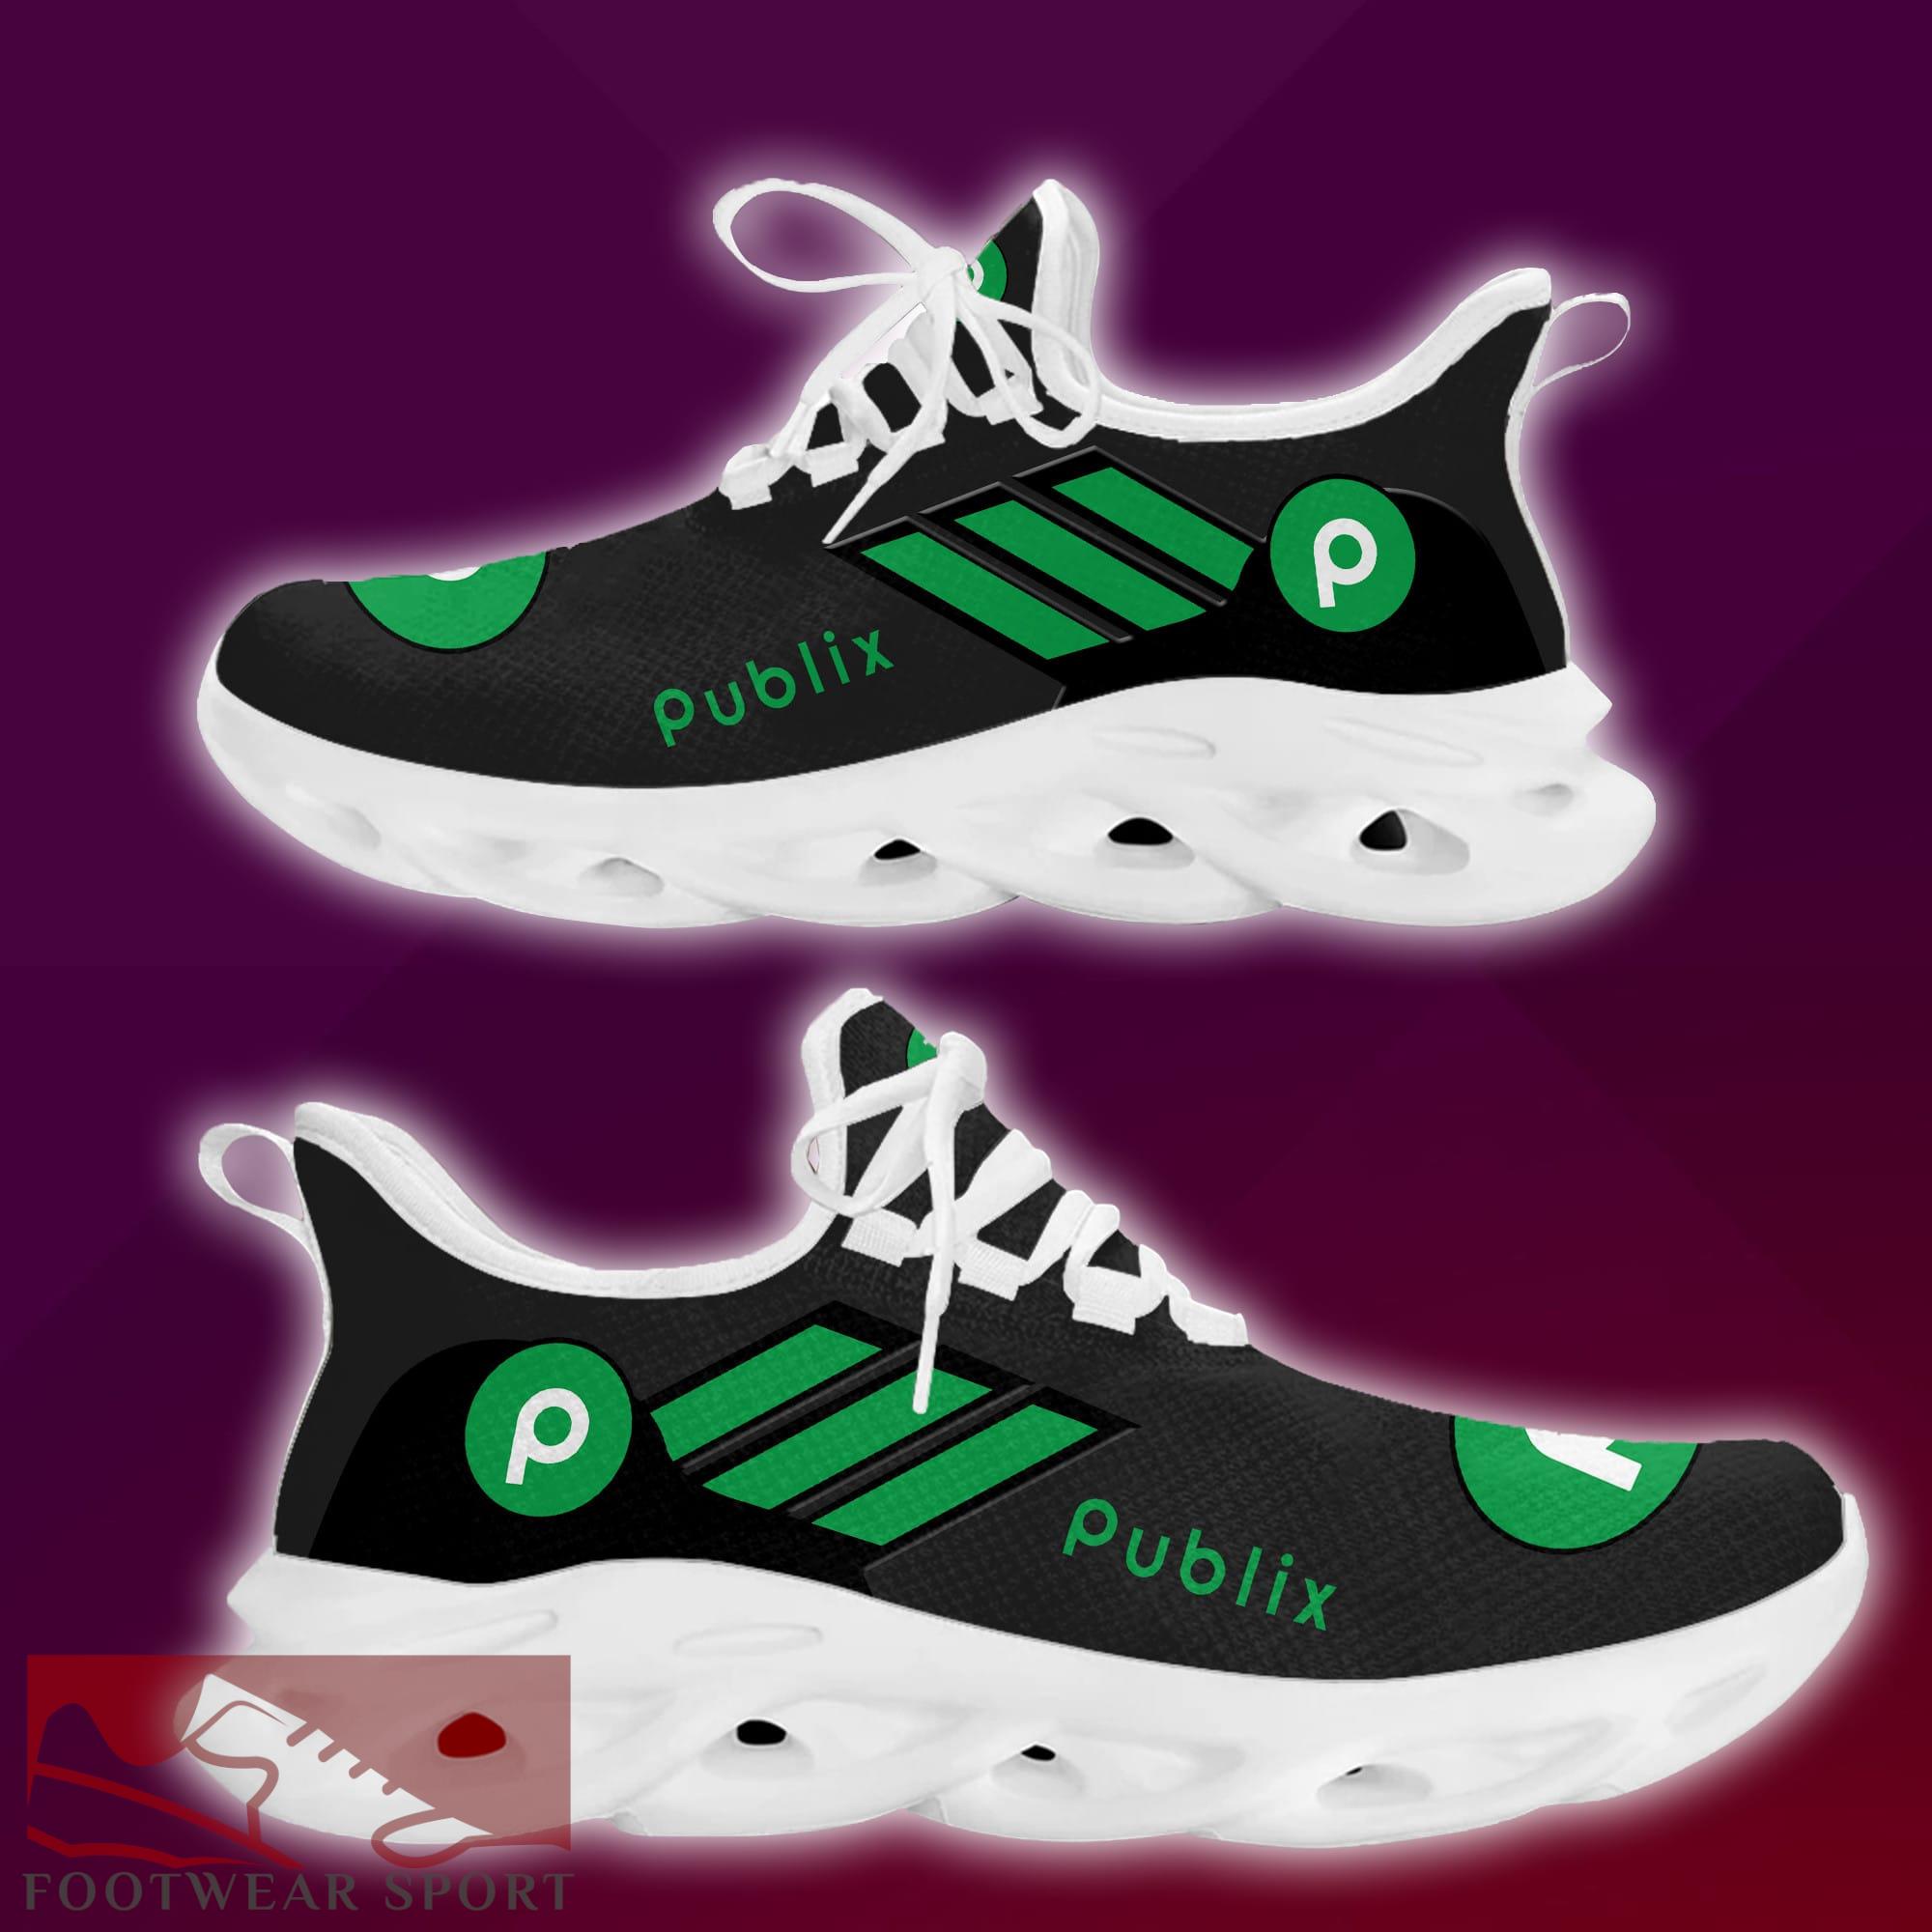 publix Brand New Logo Max Soul Sneakers Trend Sport Shoes Gift - publix New Brand Chunky Shoes Style Max Soul Sneakers Photo 2